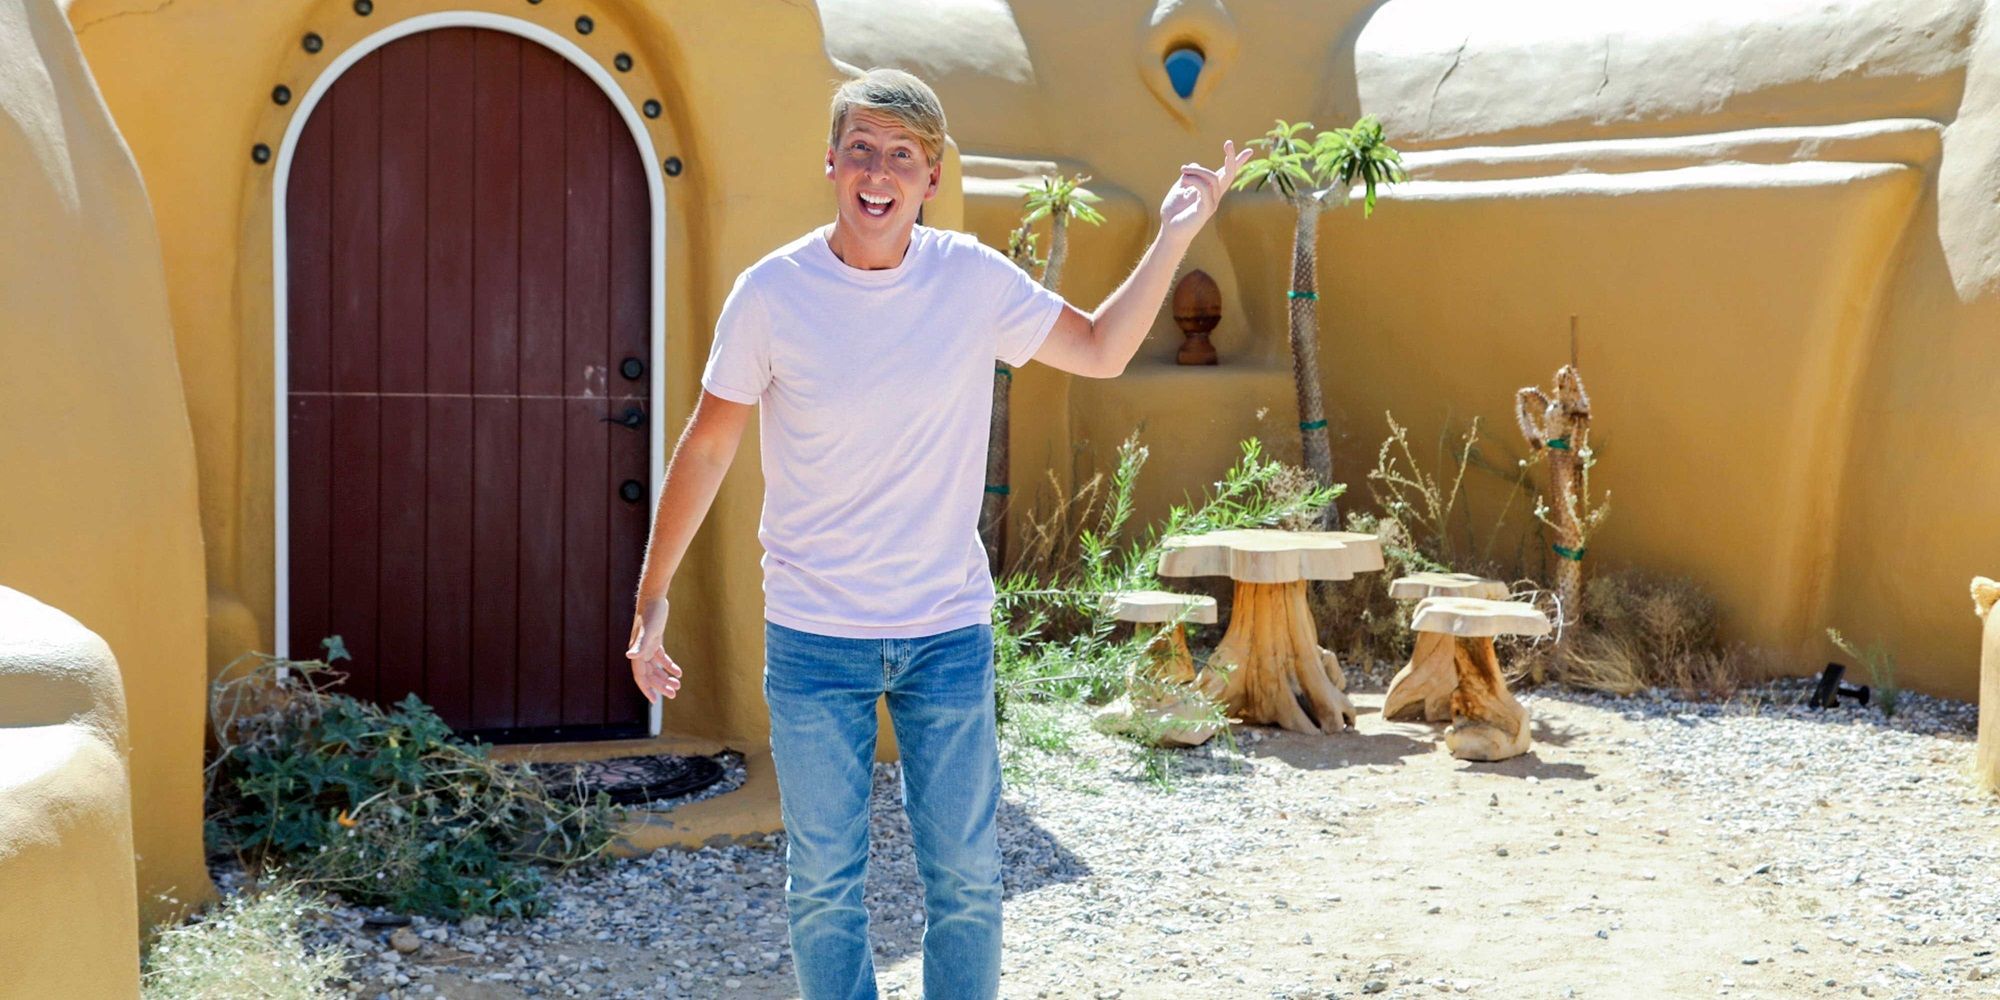 Jack McBrayer, wearing a white T-shirt and blue jeans while pointing at a yellow house, serving as the host of Zillow Gone Wild at HGTV